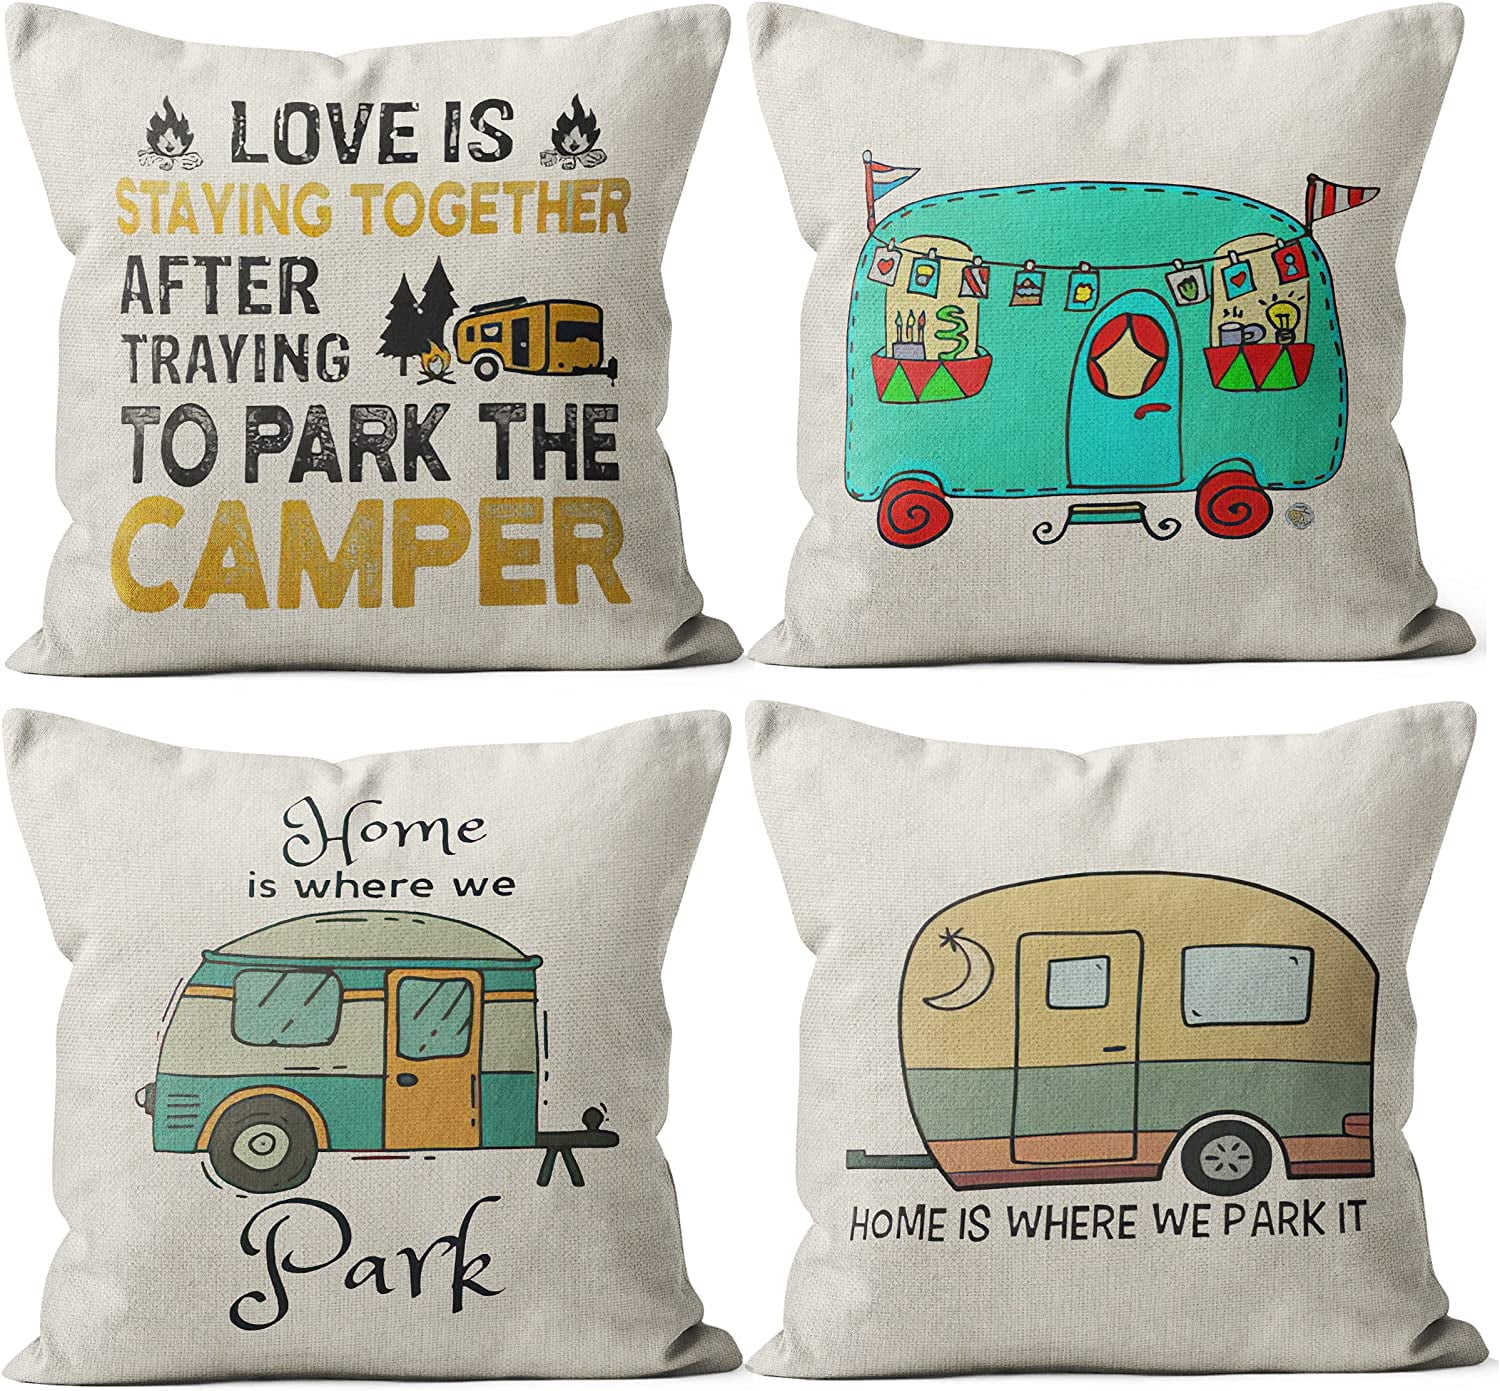 Rajfoo Throw Pillow Cover Camping Home Is Where We Park It Campervan Gift Decorative Pillow Case Home Decor Square 18x18 Inches Pillowcase 